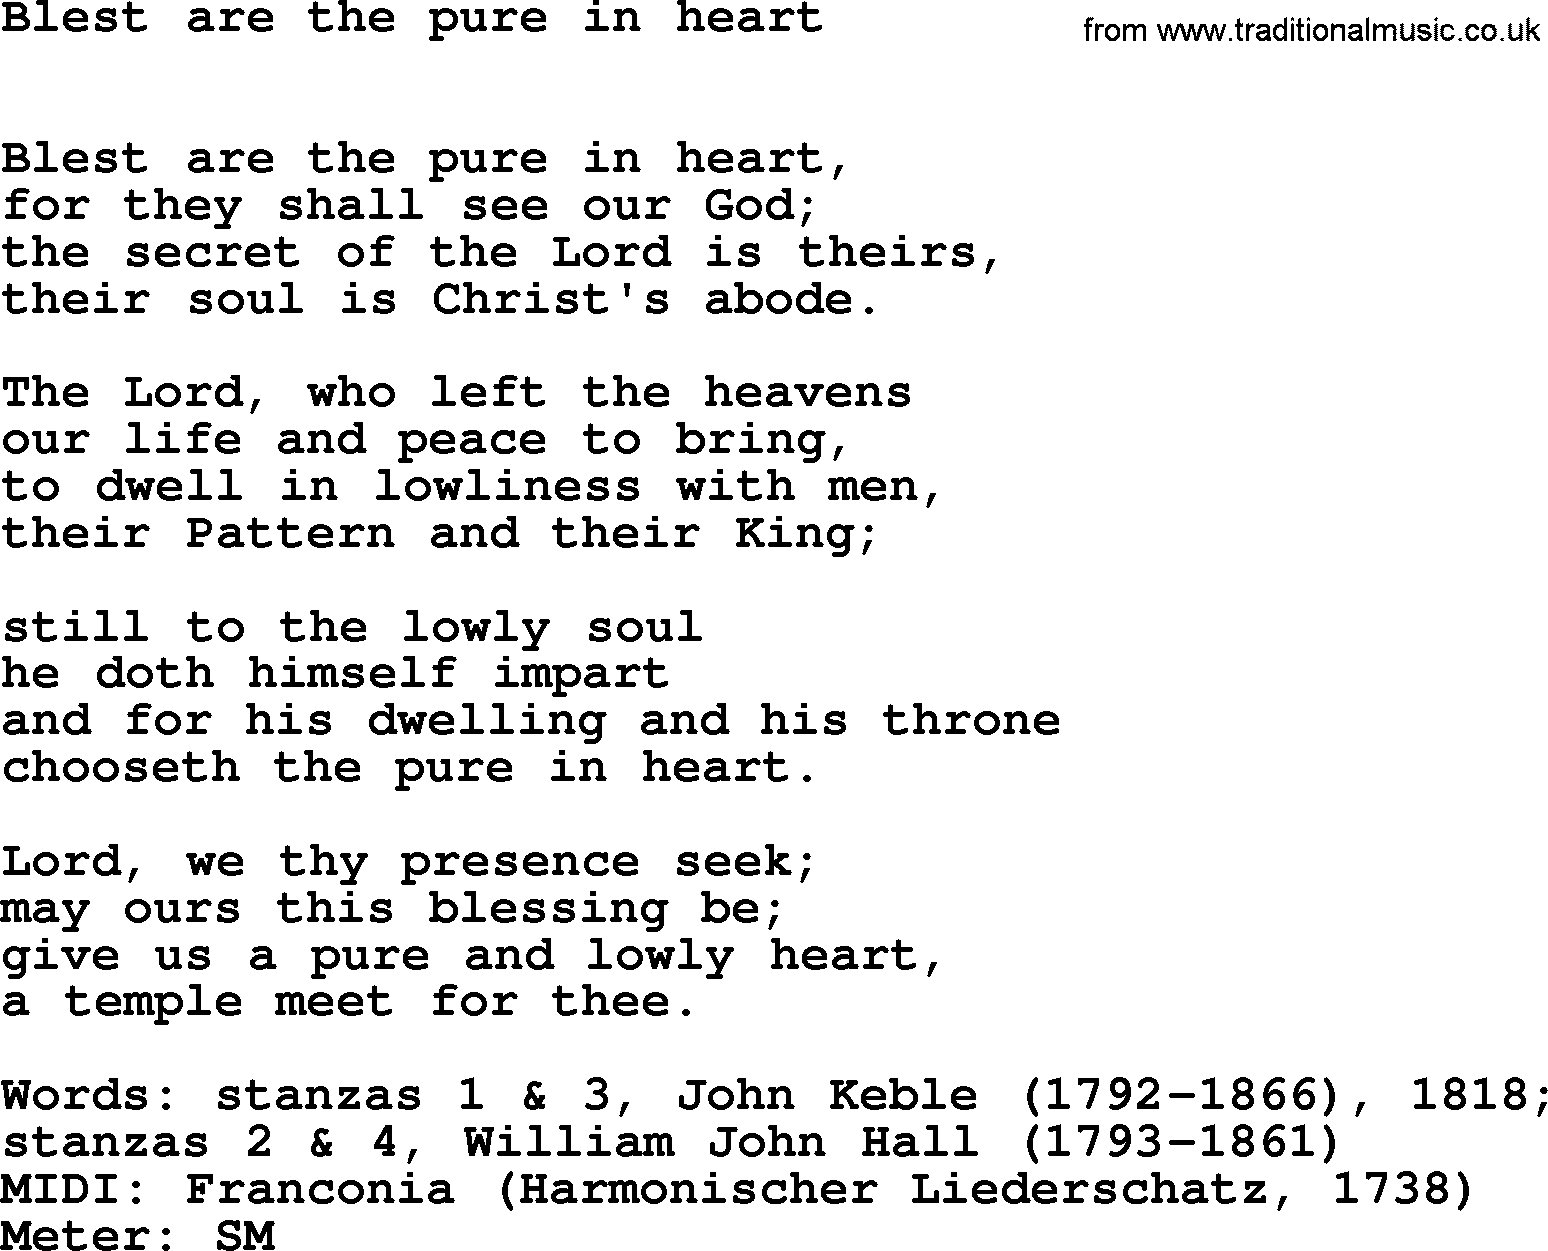 Book of Common Praise Hymn: Blest Are The Pure In Heart.txt lyrics with midi music